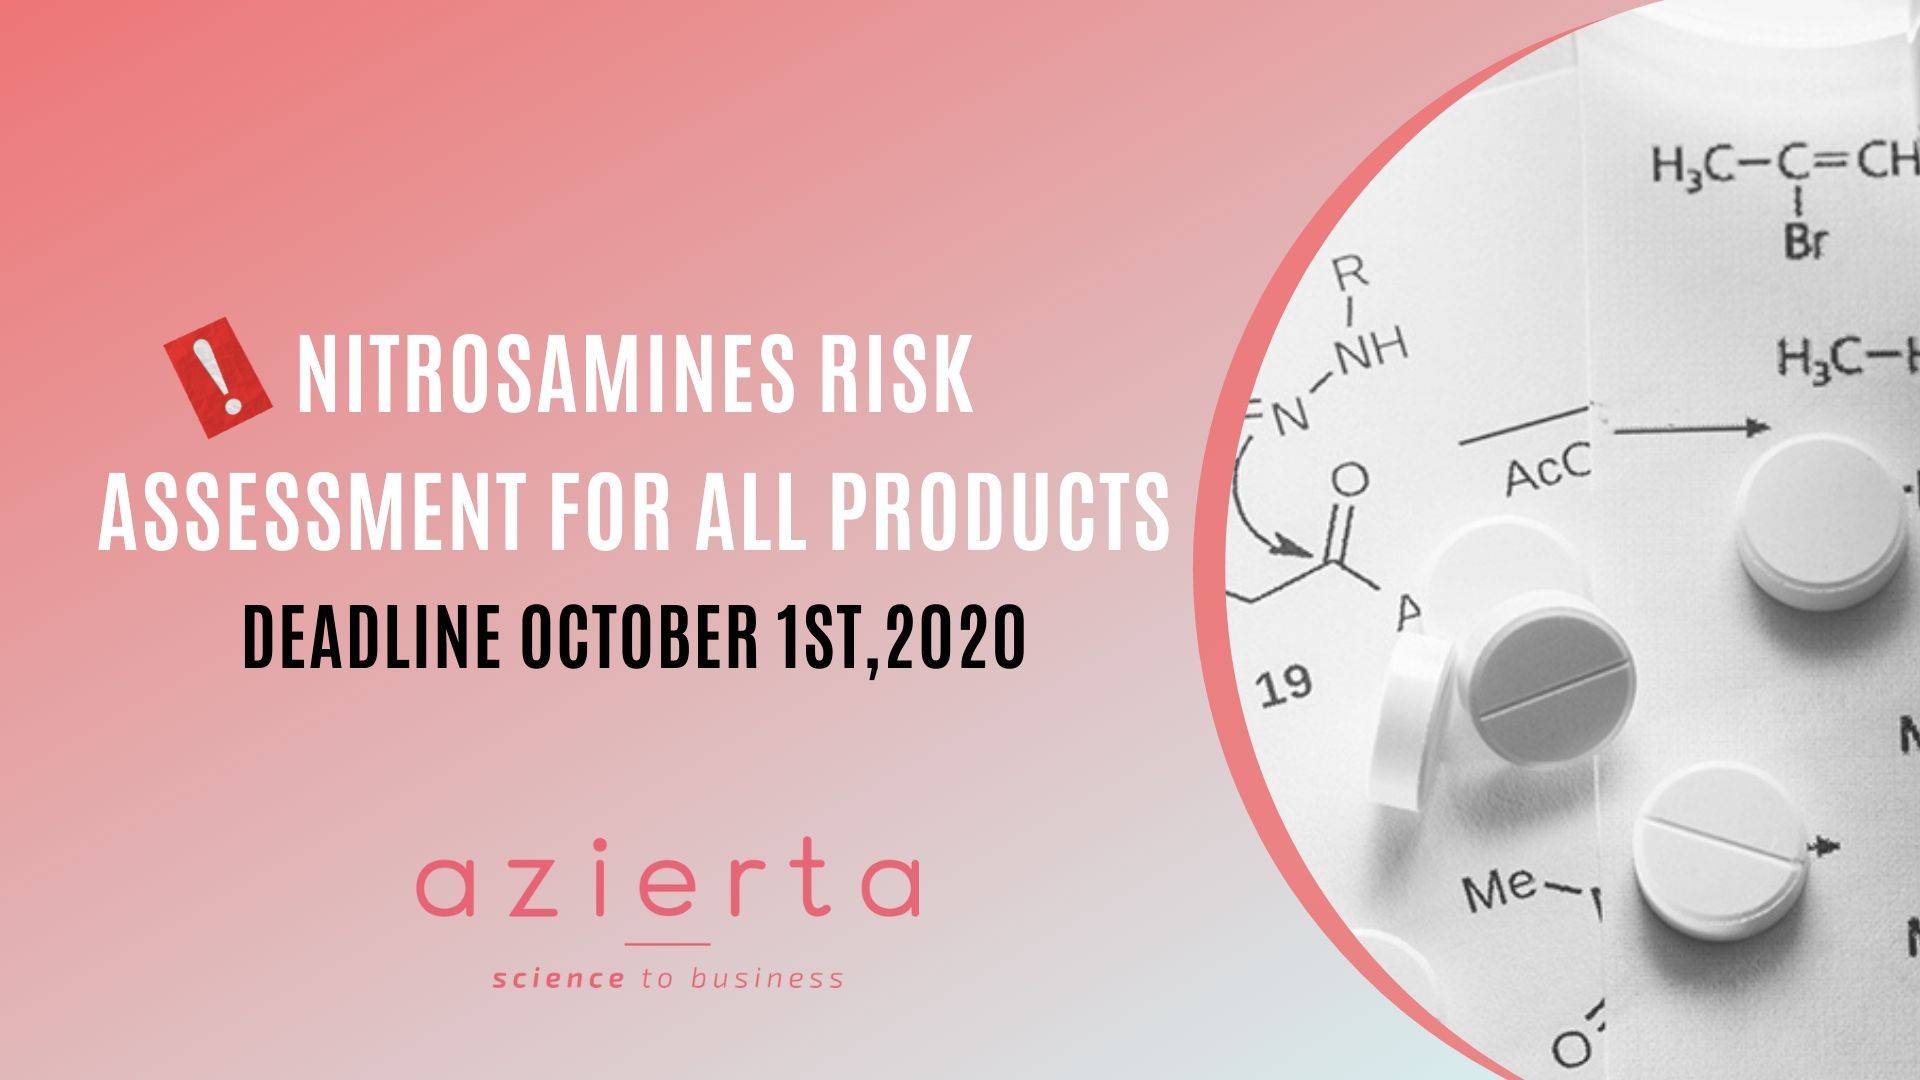 Azierta Update Extended Deadline For Risk Analysis Of Nitrosamines And Presentation To The Aemps At Azierta We Provide Support At All Steps Thanks To Our Experts In Toxicology And